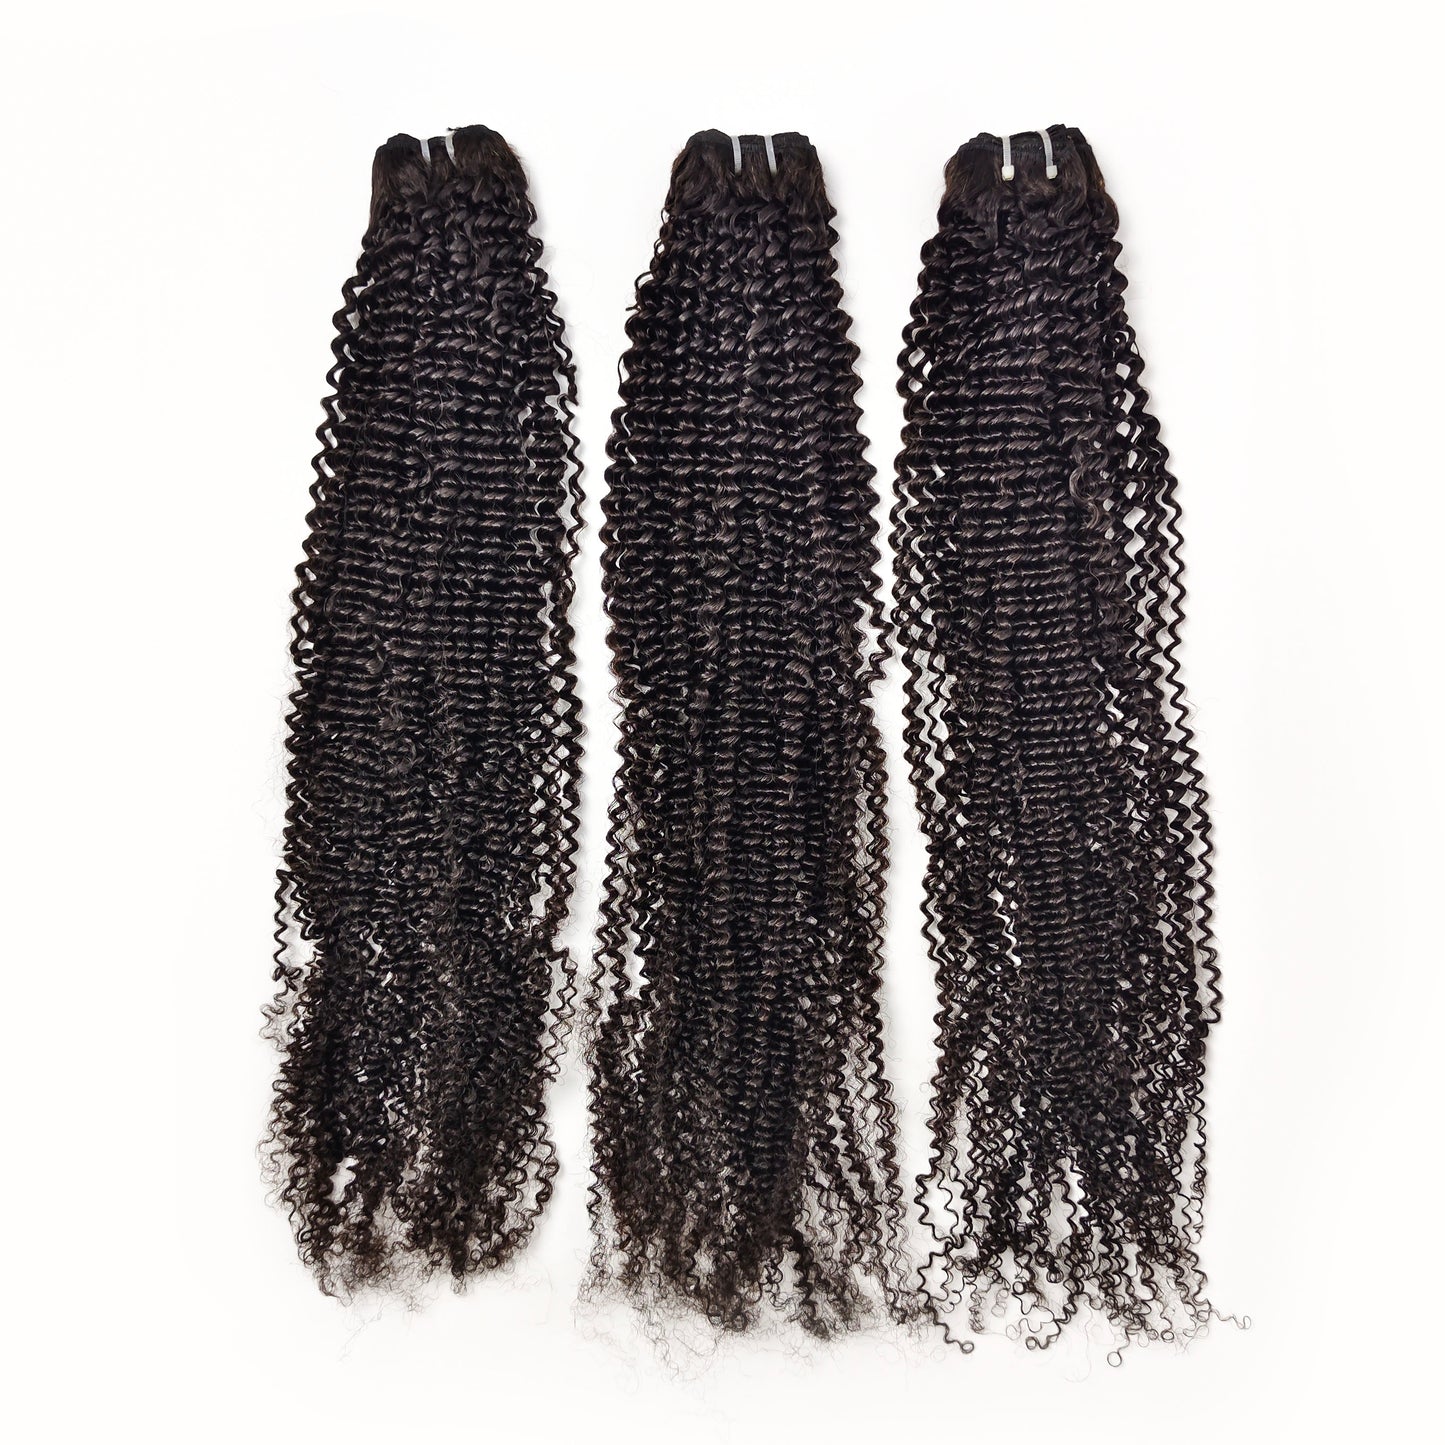 Kinky Curly Virgin Human Hair Extensions with 3 Years Life Time